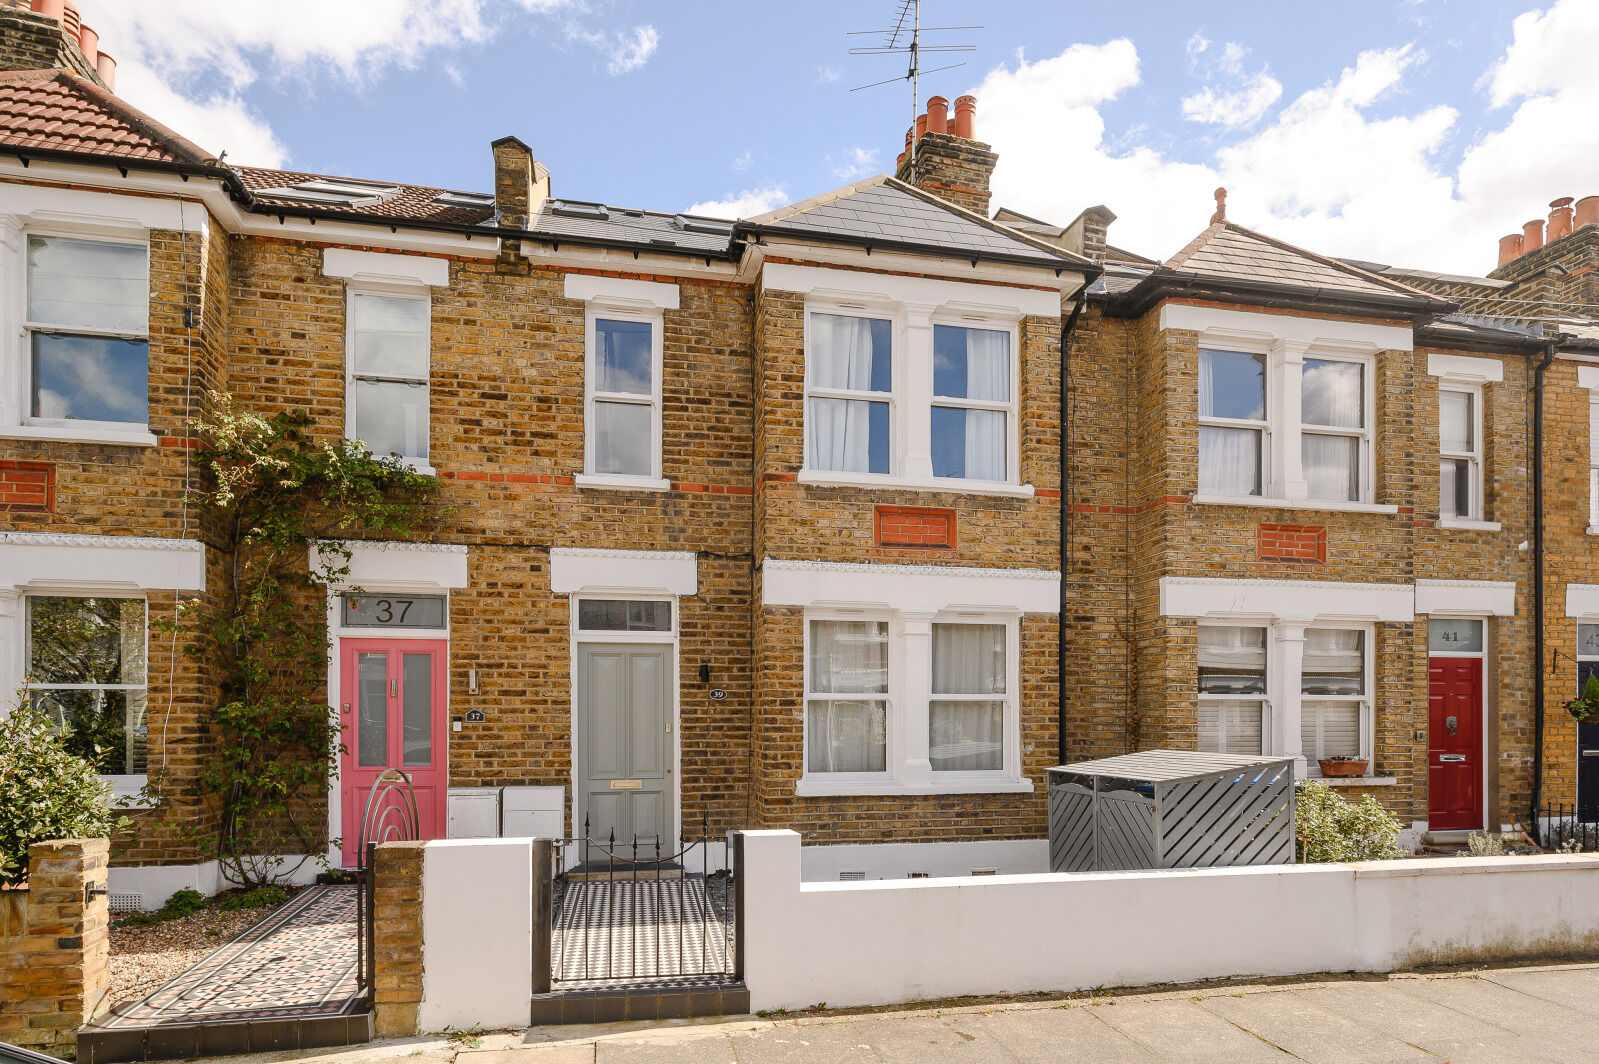 3 bedroom mid terraced house for sale Cecil Road, London, SW19, main image